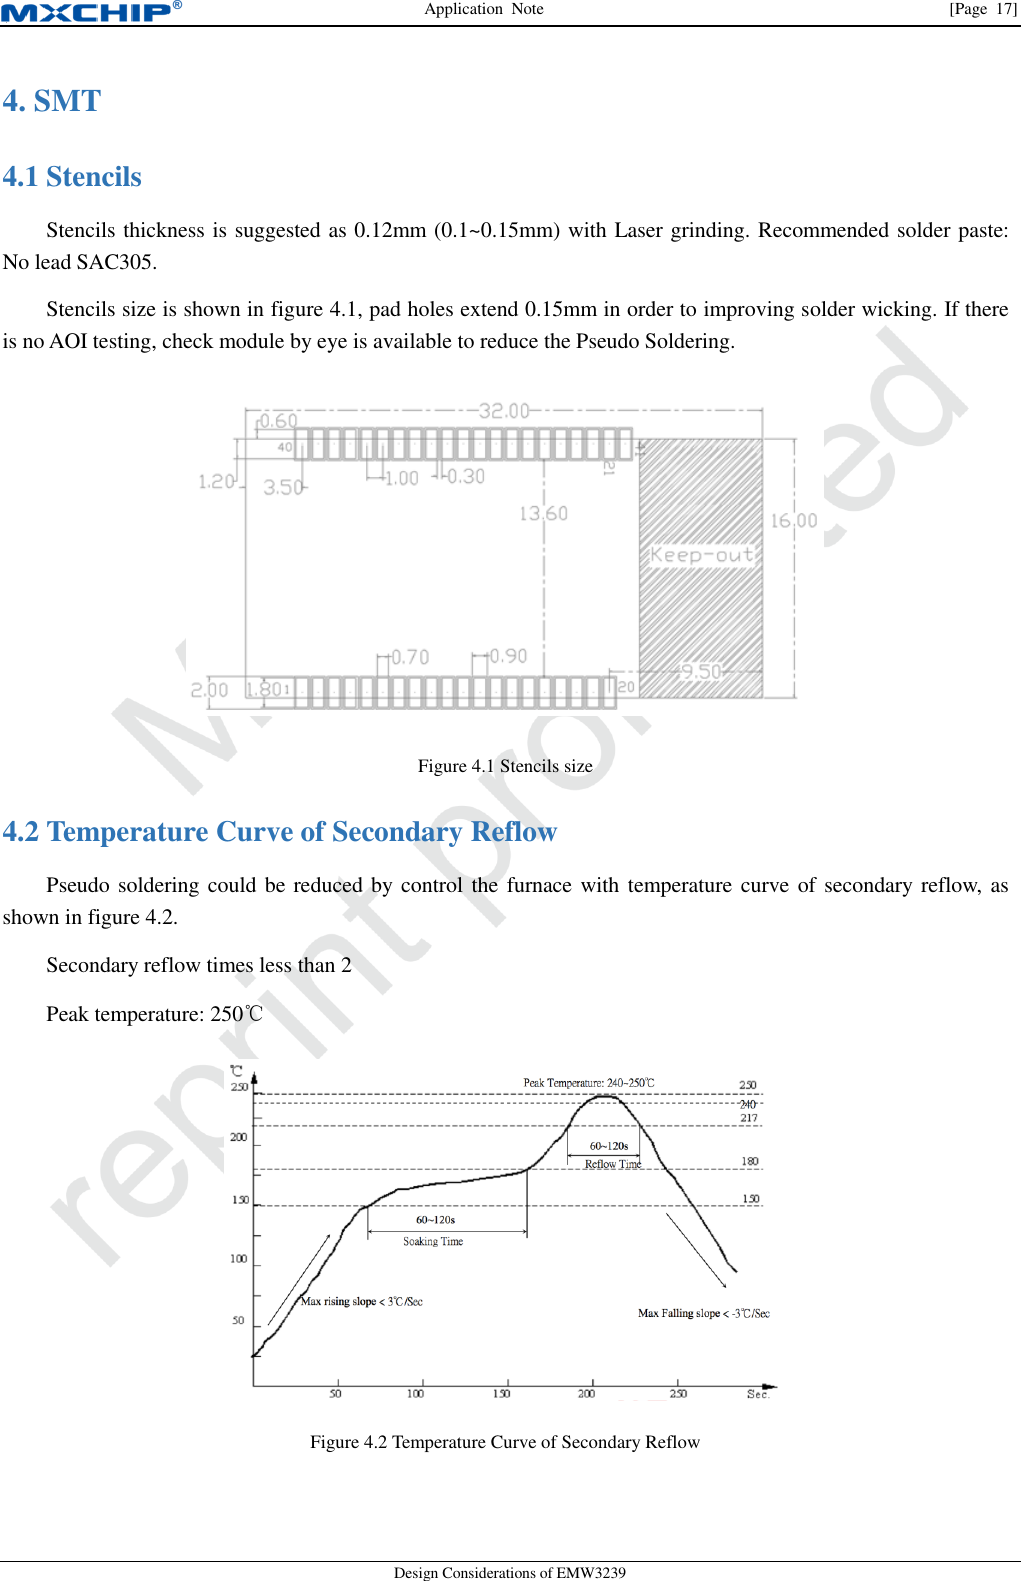 Application  Note                [Page  17] Design Considerations of EMW3239 4. SMT    Stencils 4.1Stencils thickness is suggested as 0.12mm (0.1~0.15mm) with Laser grinding. Recommended solder paste: No lead SAC305. Stencils size is shown in figure 4.1, pad holes extend 0.15mm in order to improving solder wicking. If there is no AOI testing, check module by eye is available to reduce the Pseudo Soldering.  Figure 4.1 Stencils size  Temperature Curve of Secondary Reflow 4.2Pseudo soldering could be reduced by control the furnace with temperature curve of secondary reflow, as shown in figure 4.2. Secondary reflow times less than 2 Peak temperature: 250℃  Figure 4.2 Temperature Curve of Secondary Reflow  